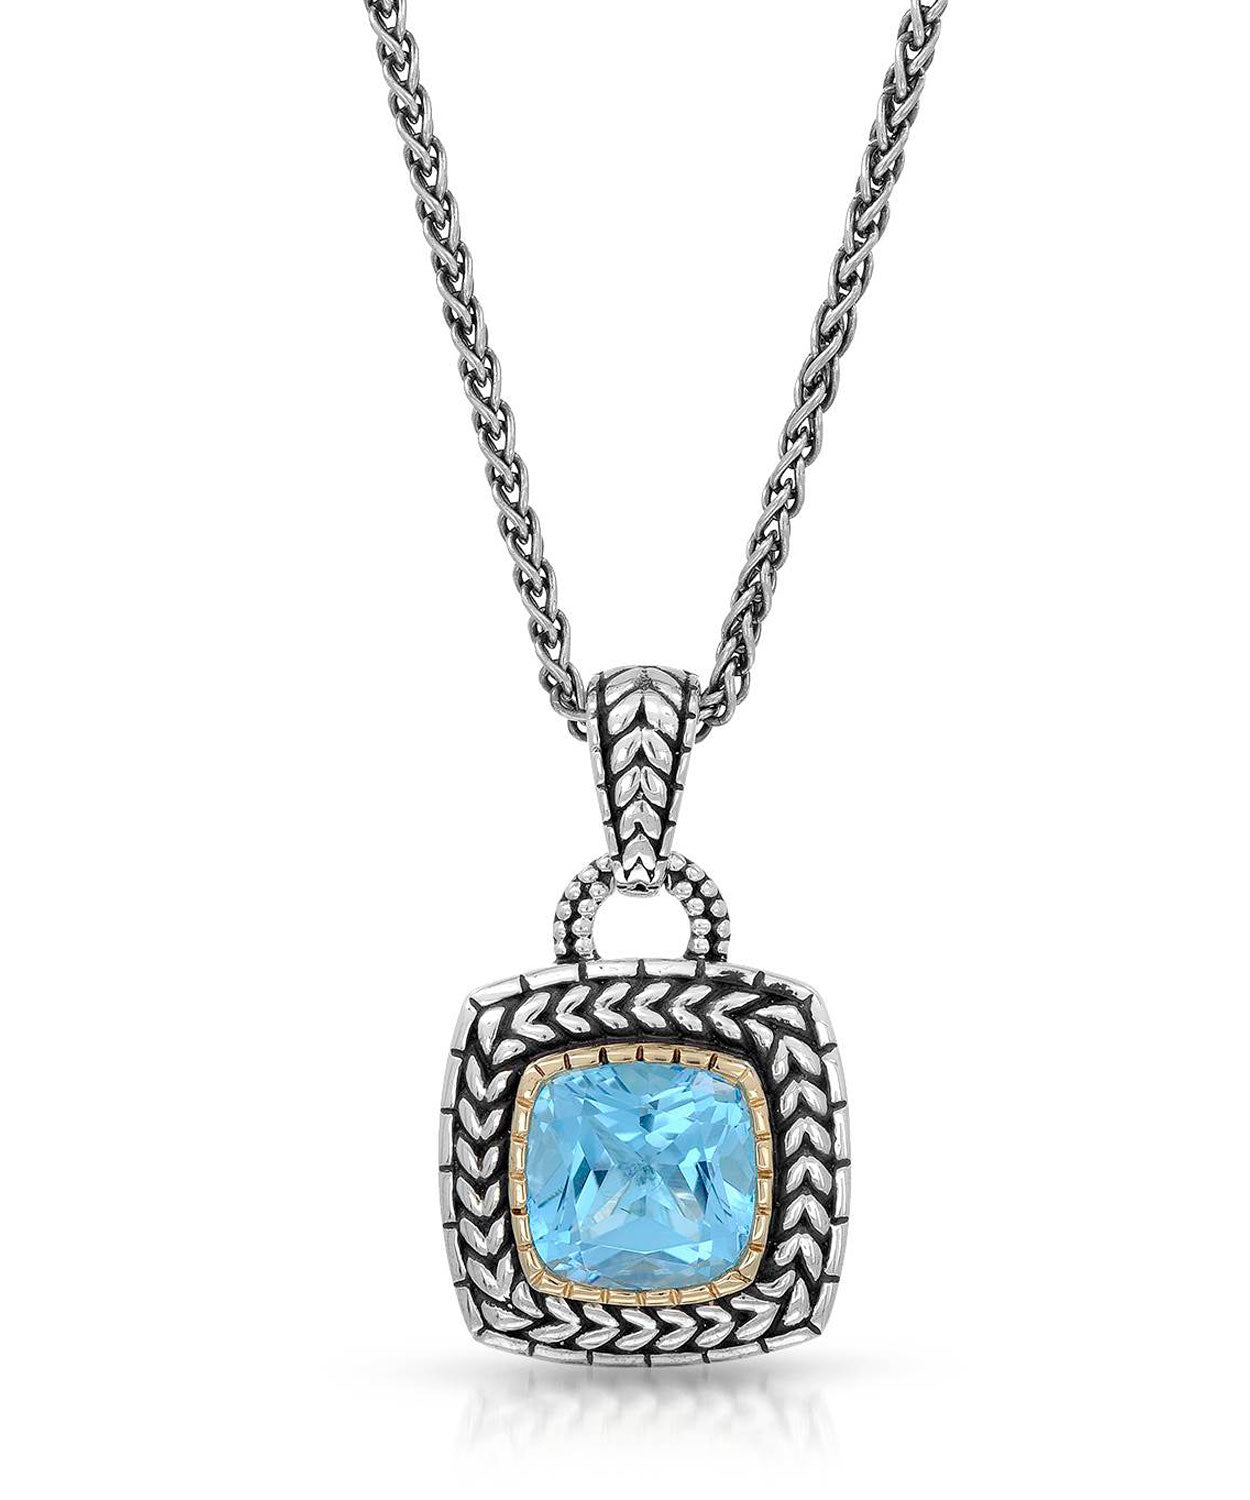 Colore by Simon Golub 3.20 ctw Natural Fine Swiss Blue Topaz 925 Sterling Silver Pendant With Chain - With 18k Gold Inlay View 1